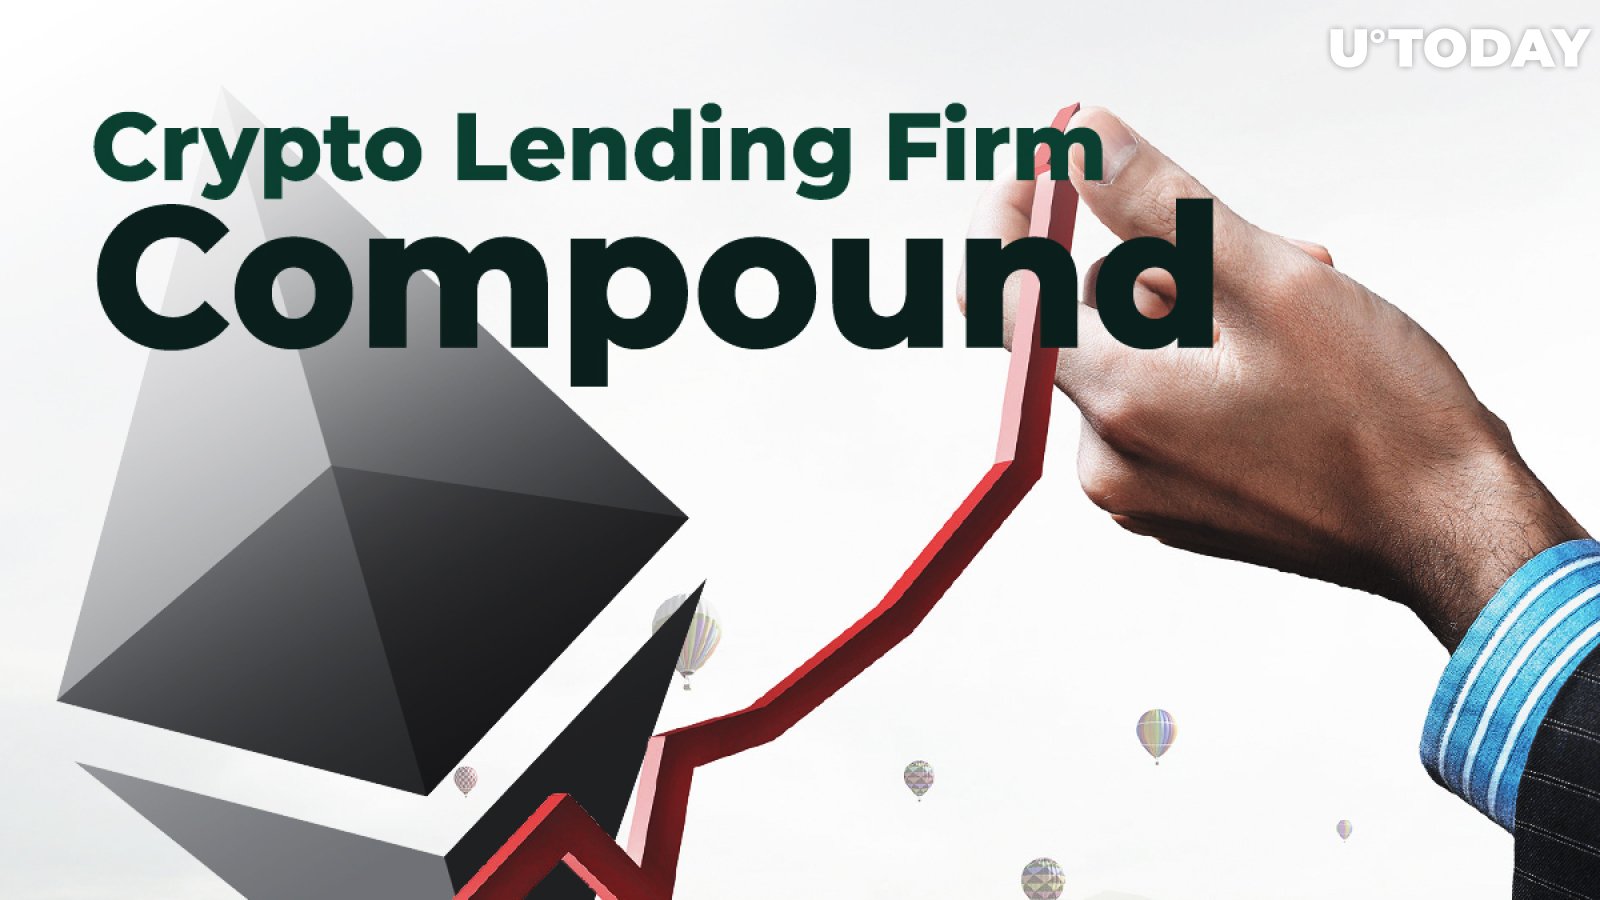 Crypto Lending Firm Compound to Expand to Retail User Market: Fortune 